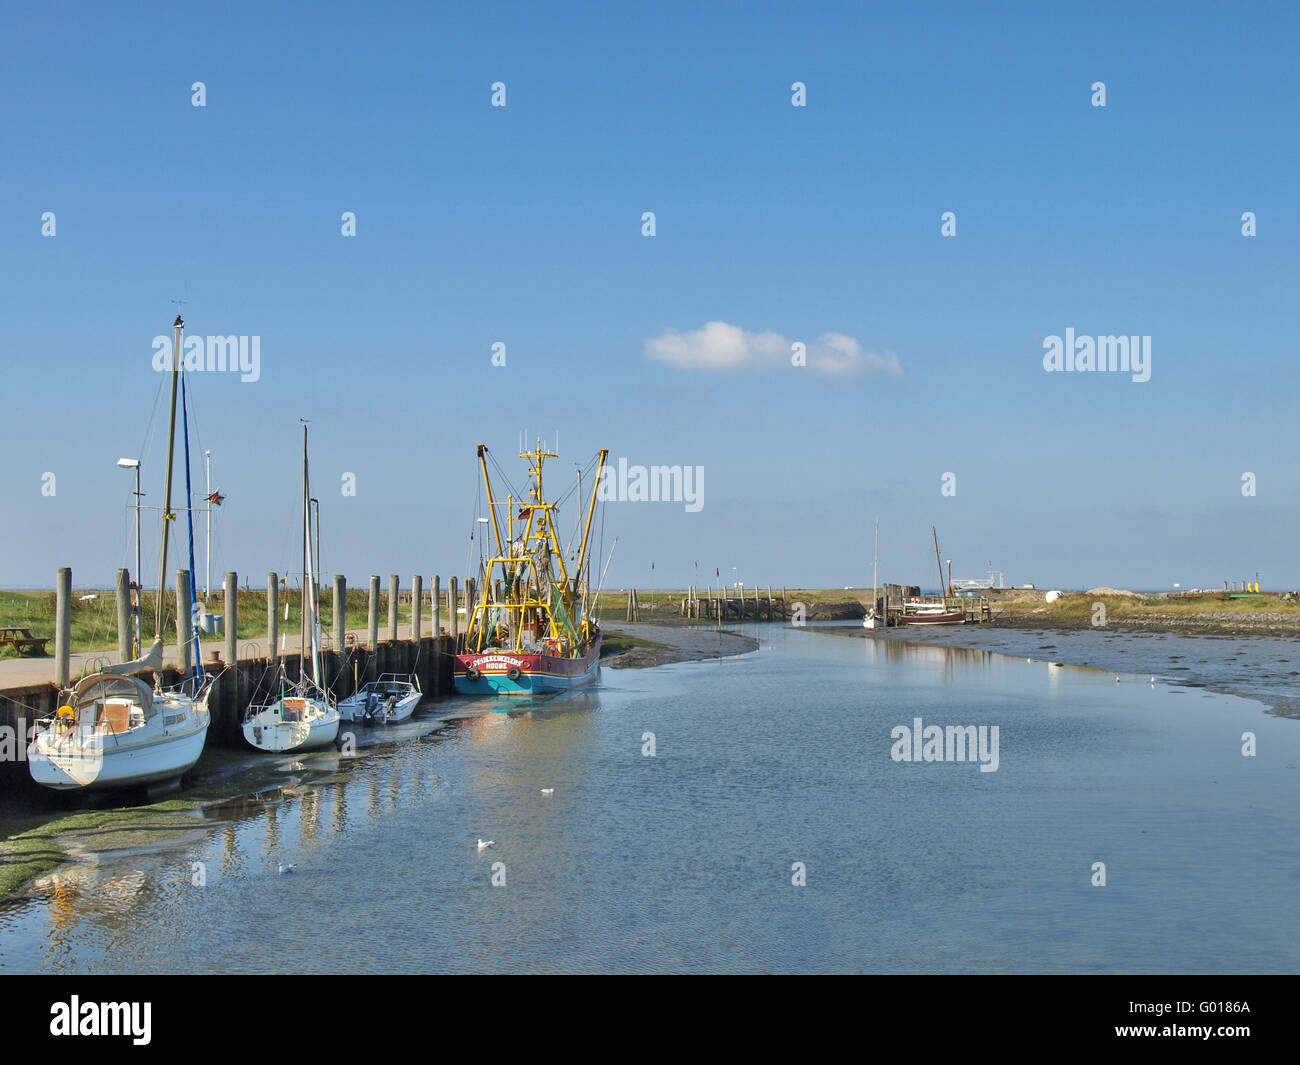 The Holm Harbour of Hooge, Germany Stock Photo